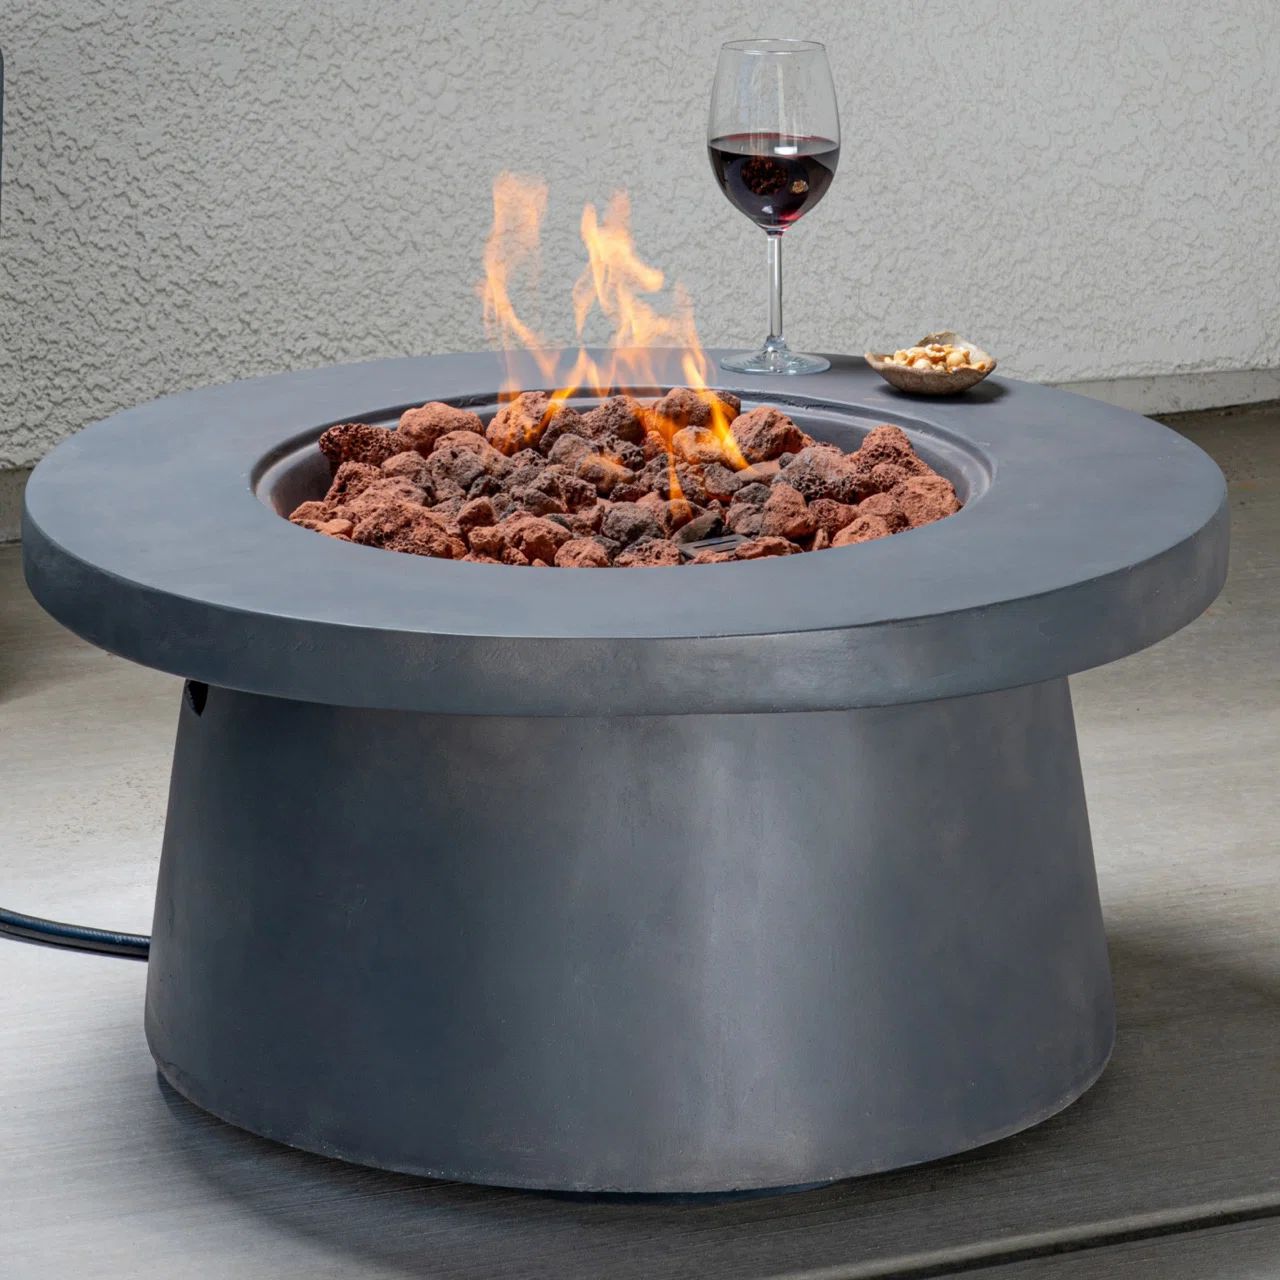 14.37" H x 29.5" W Magnesium Oxide Propane Outdoor Fire Pit | Wayfair North America